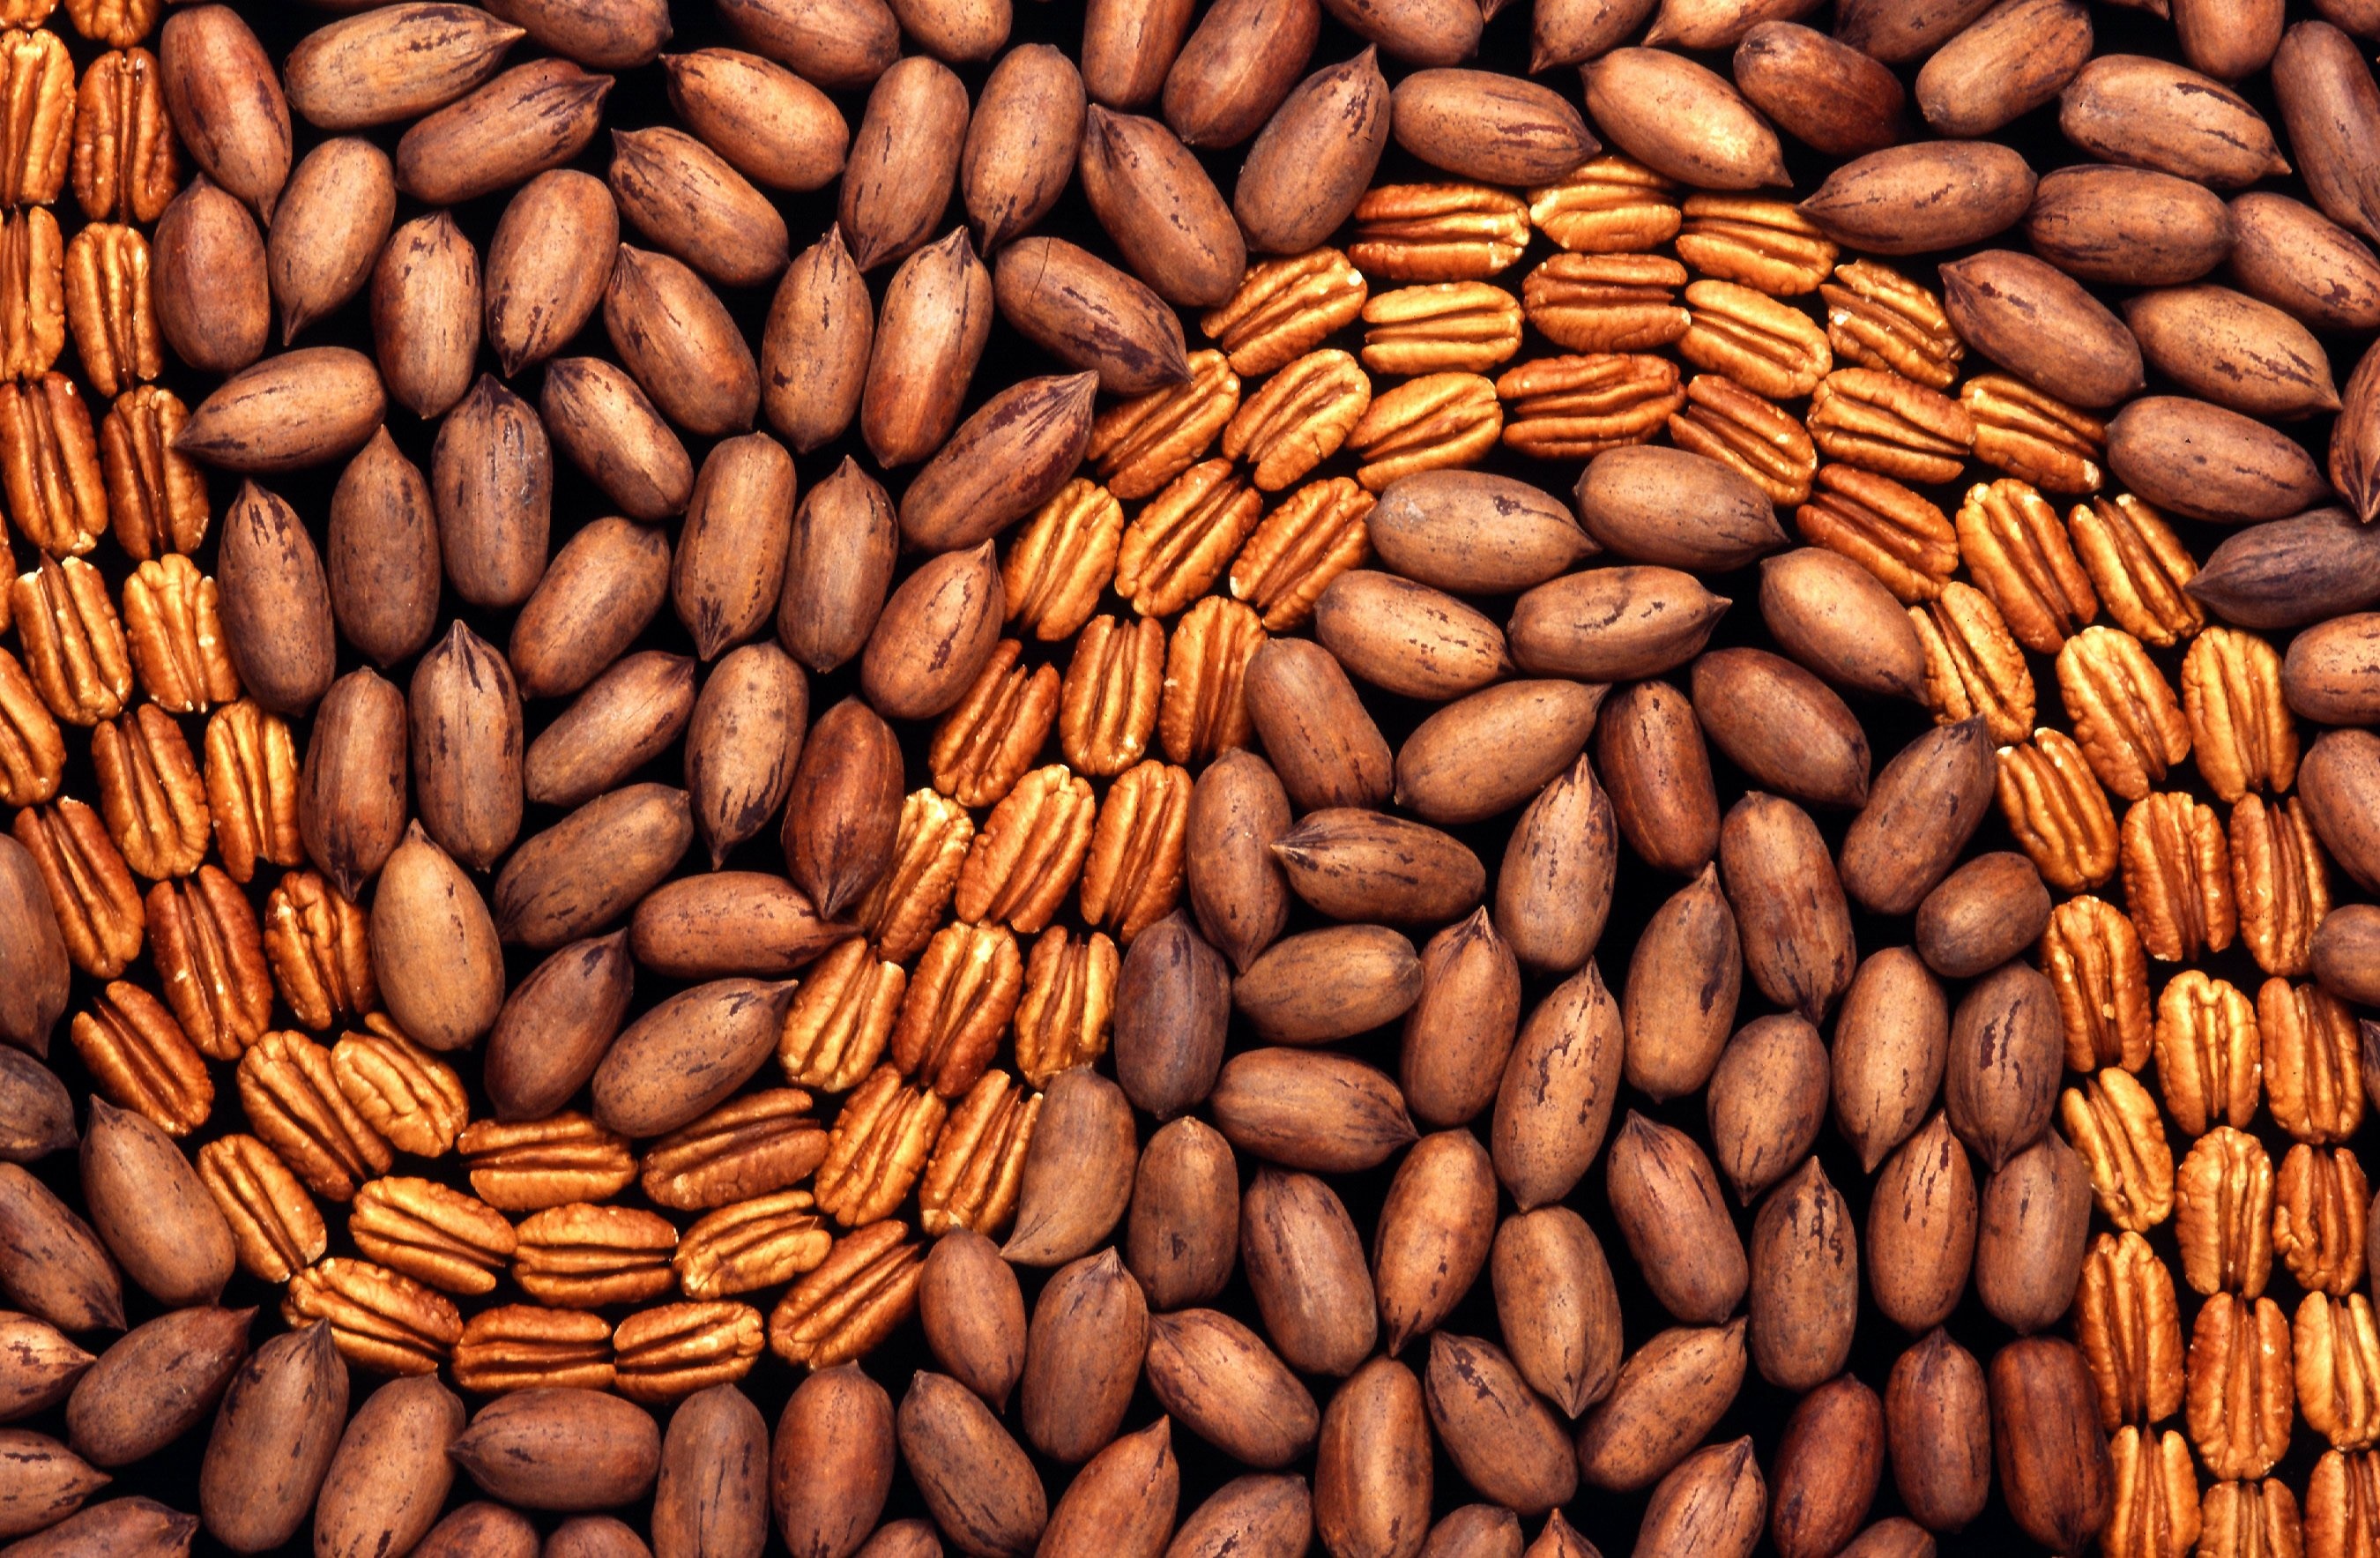 Pecans: One of the most valuable North American nut species. 2700x1770 HD Wallpaper.